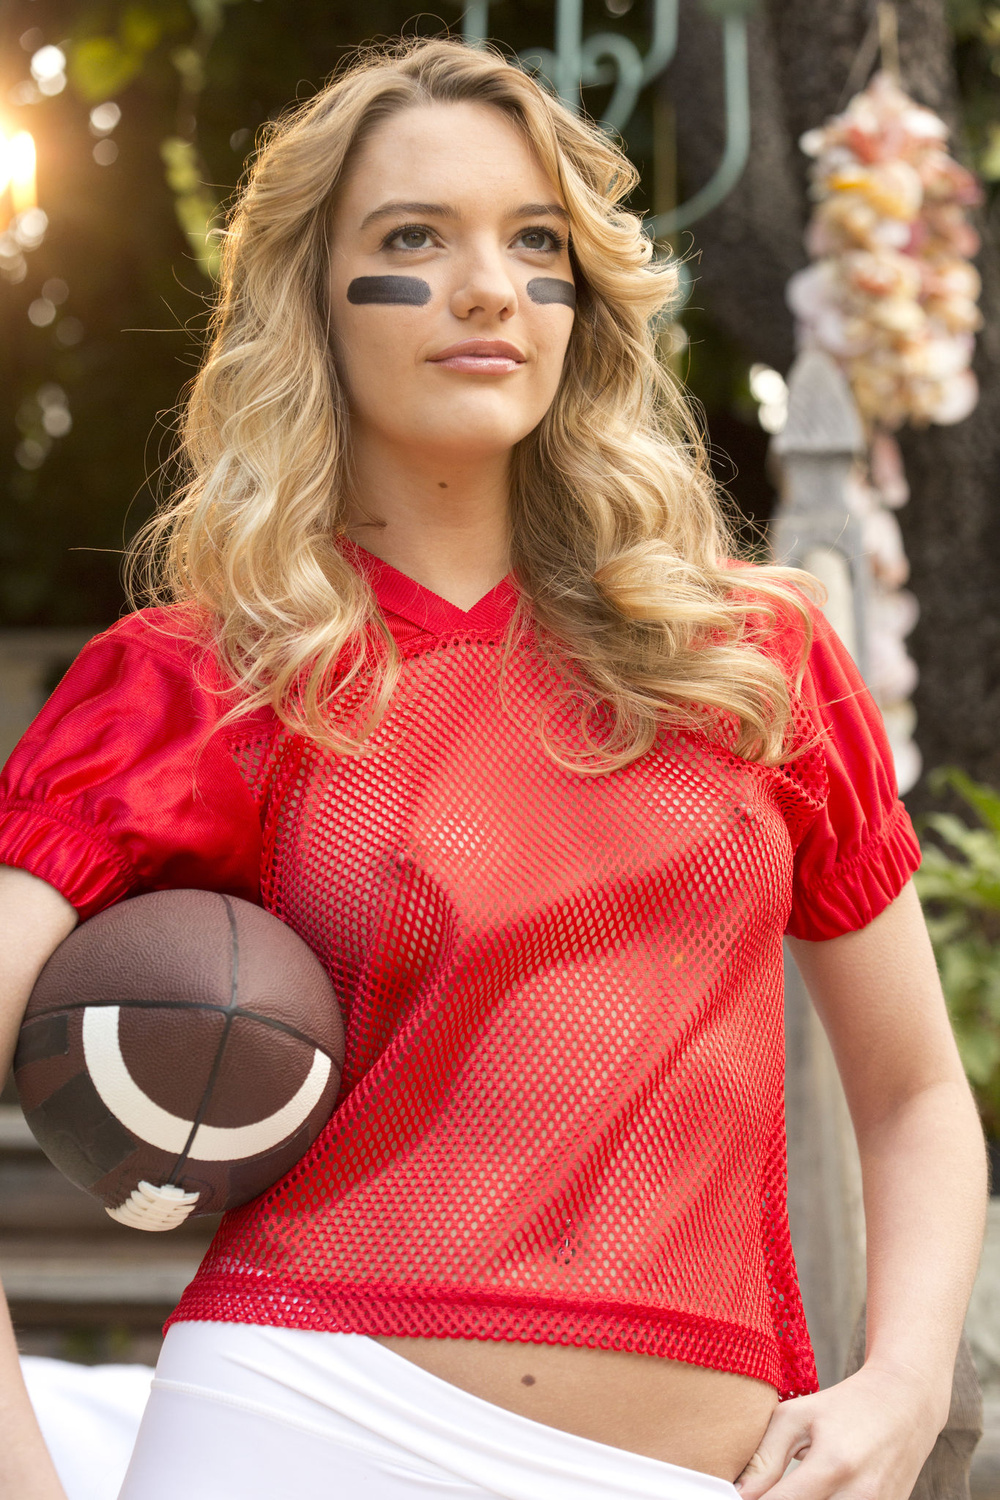 Kenna James in Touchdown by Charles Lightfoot